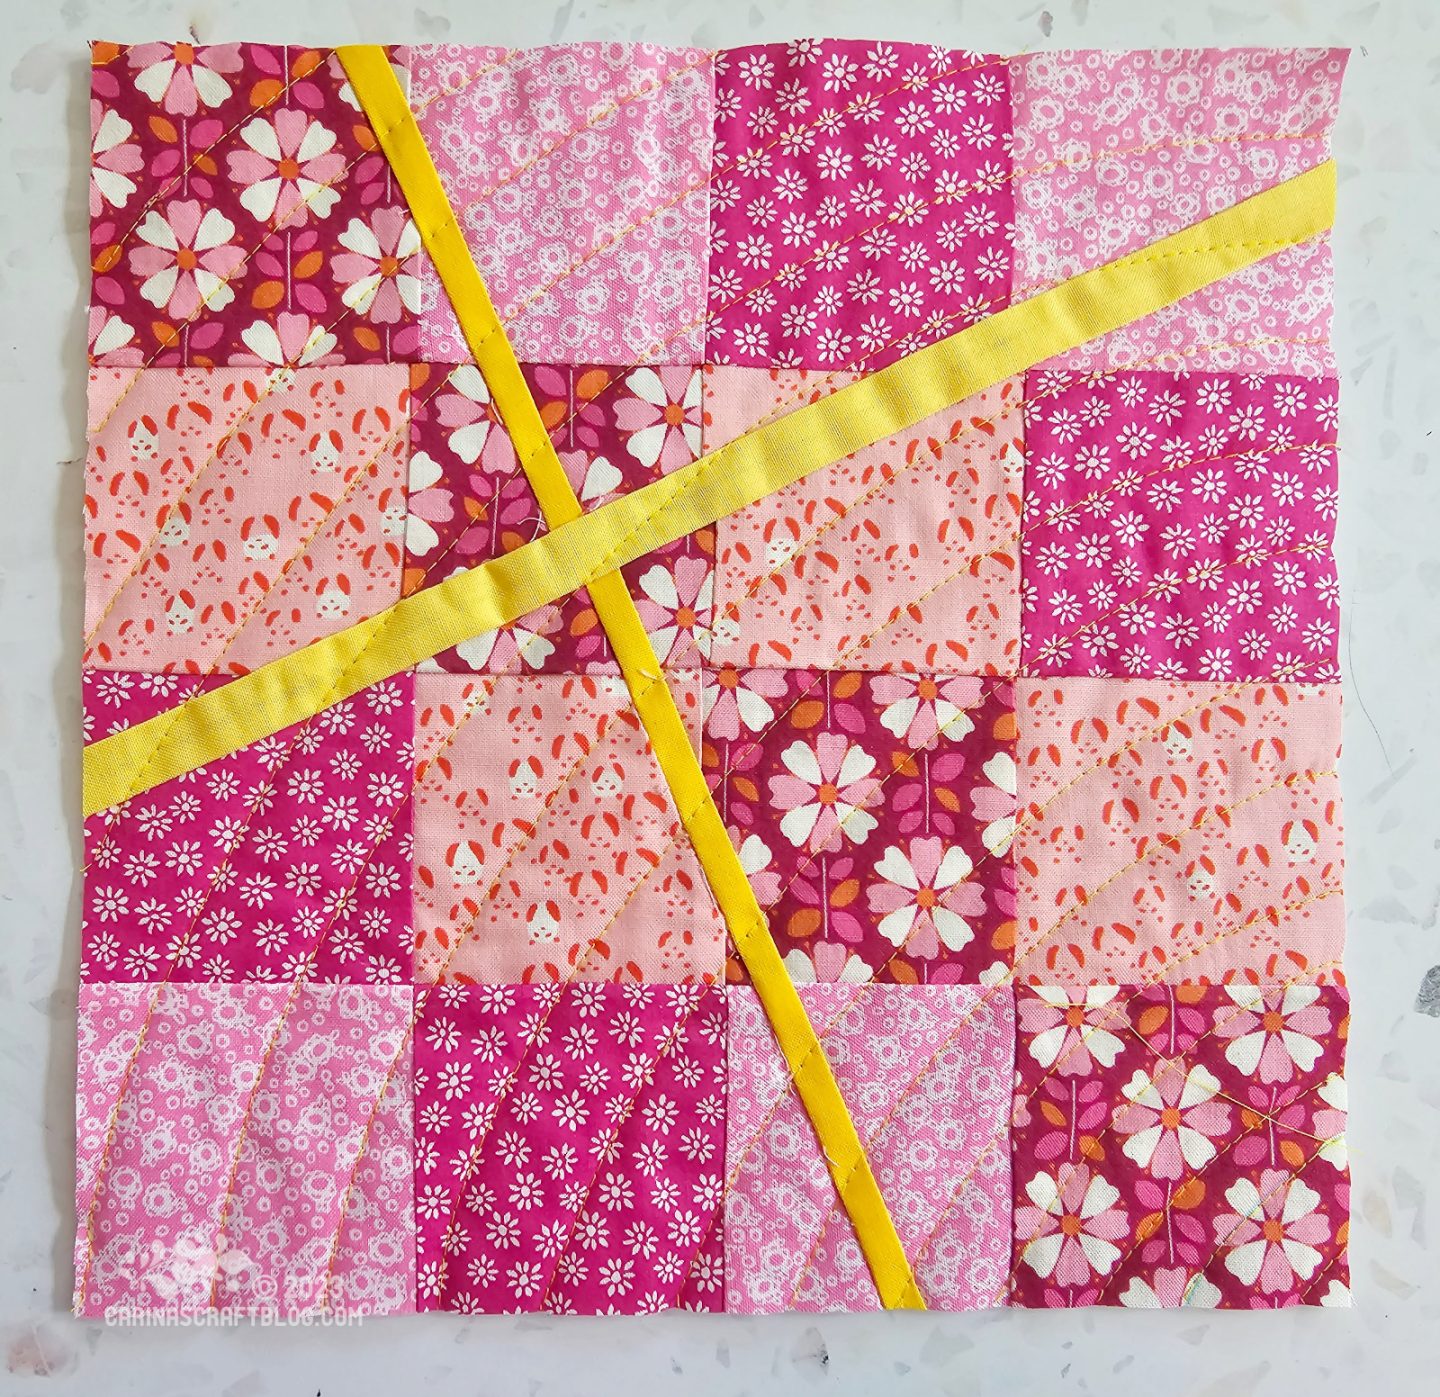 Small square quilt made of 16 pink squares of fabric in a four by four grid. The grid has been slashed across in two random diagonals and two yellow strips have been inserted in the grid.